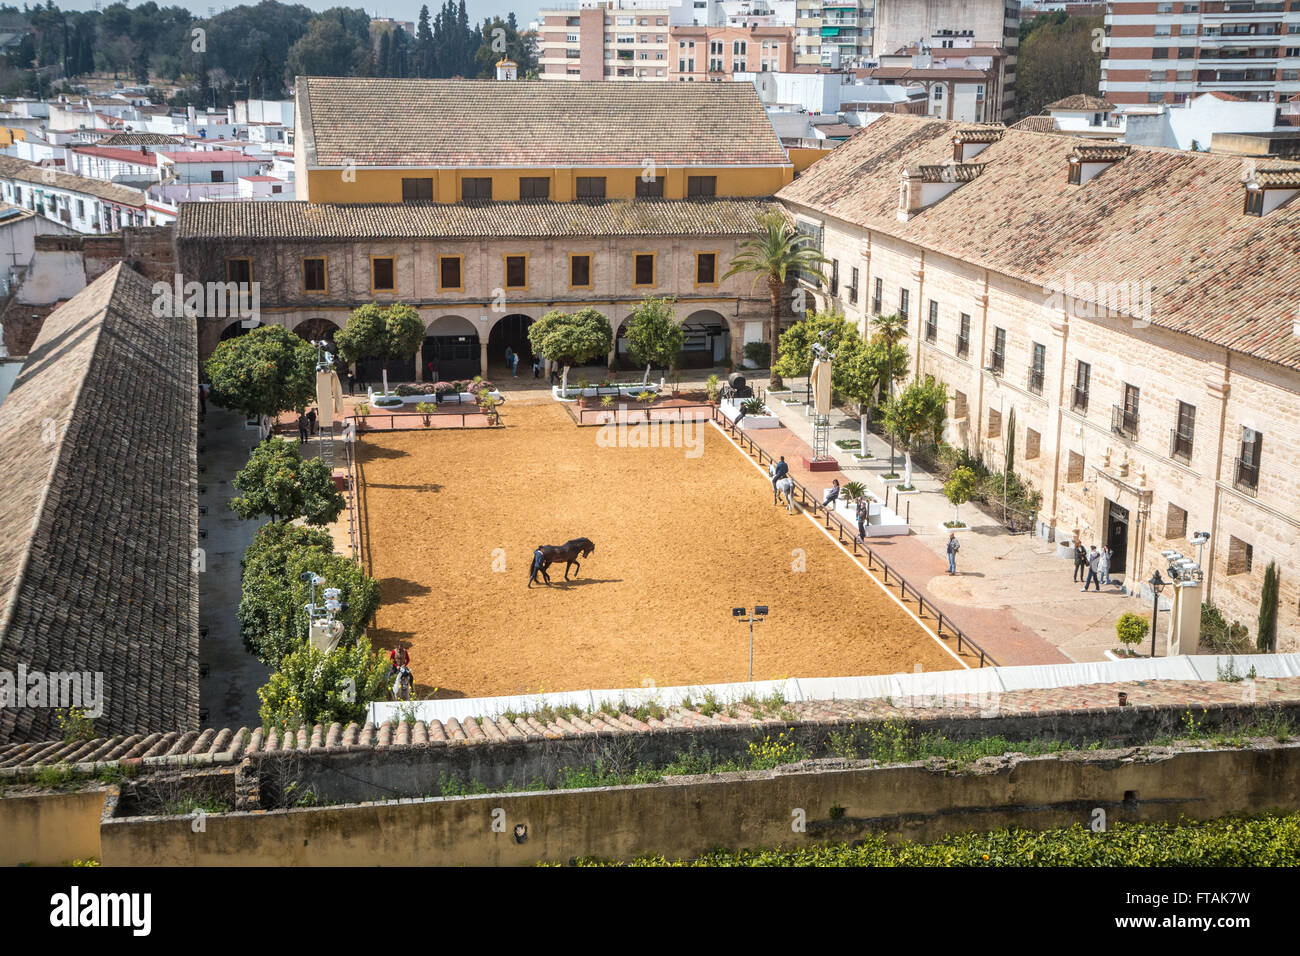 Royal stables seen from above Stock Photo